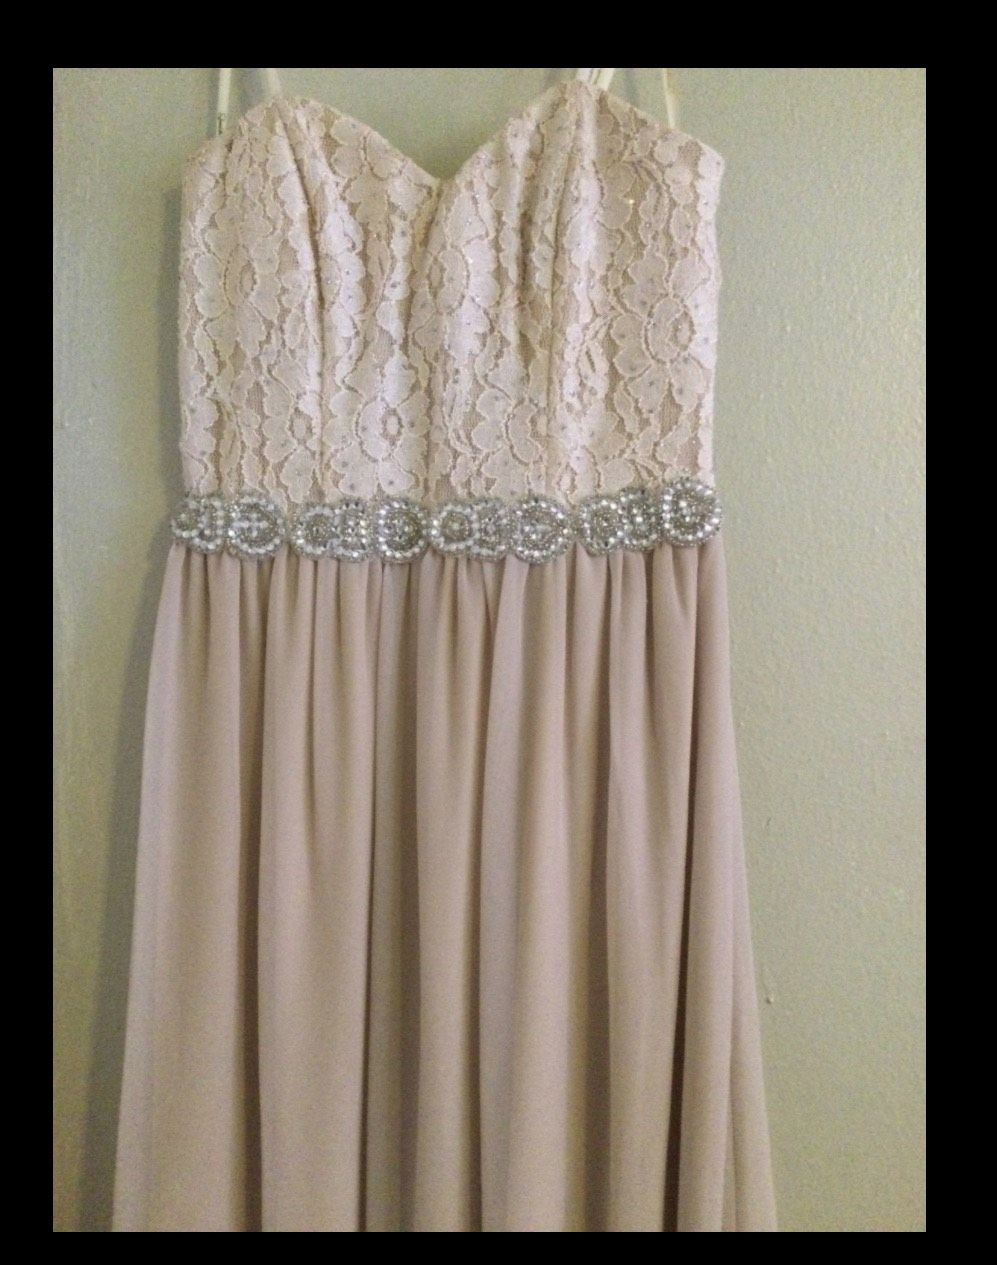 David's Bridal Size 0 Strapless Lace Nude A-line Dress on Queenly